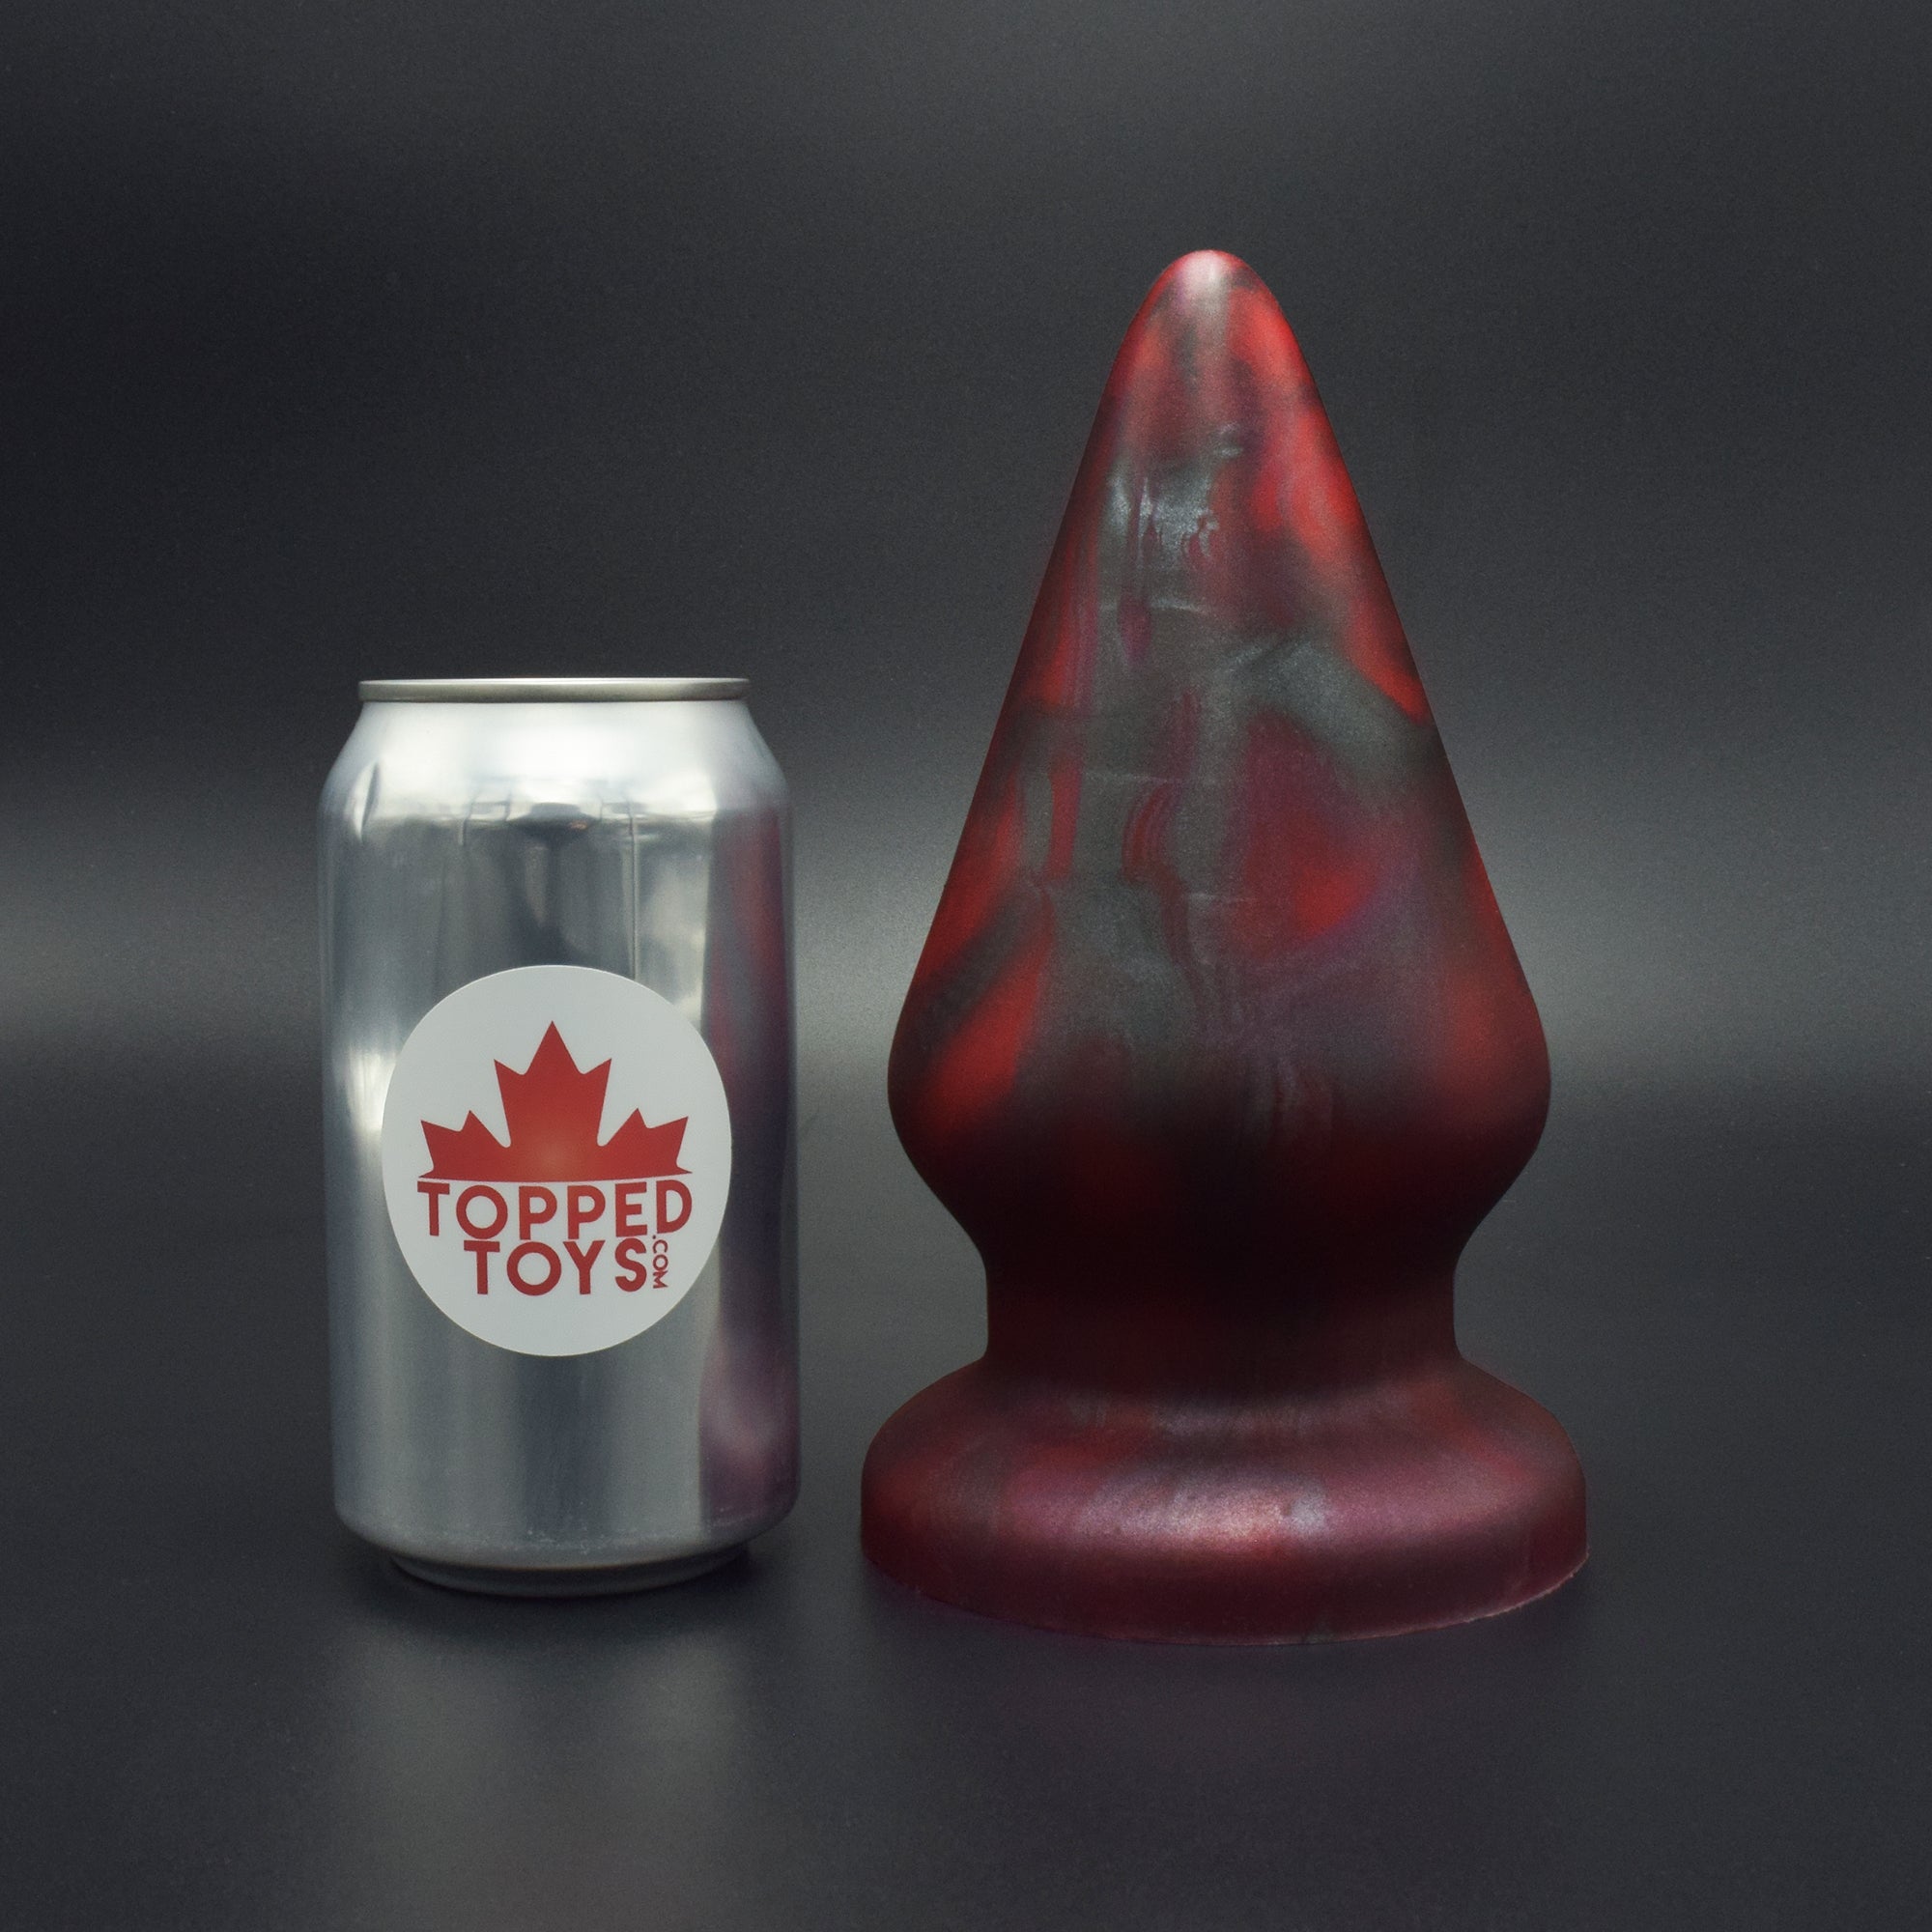 Grip 115 in Forge Red, next to pop can with Topped Toys logo